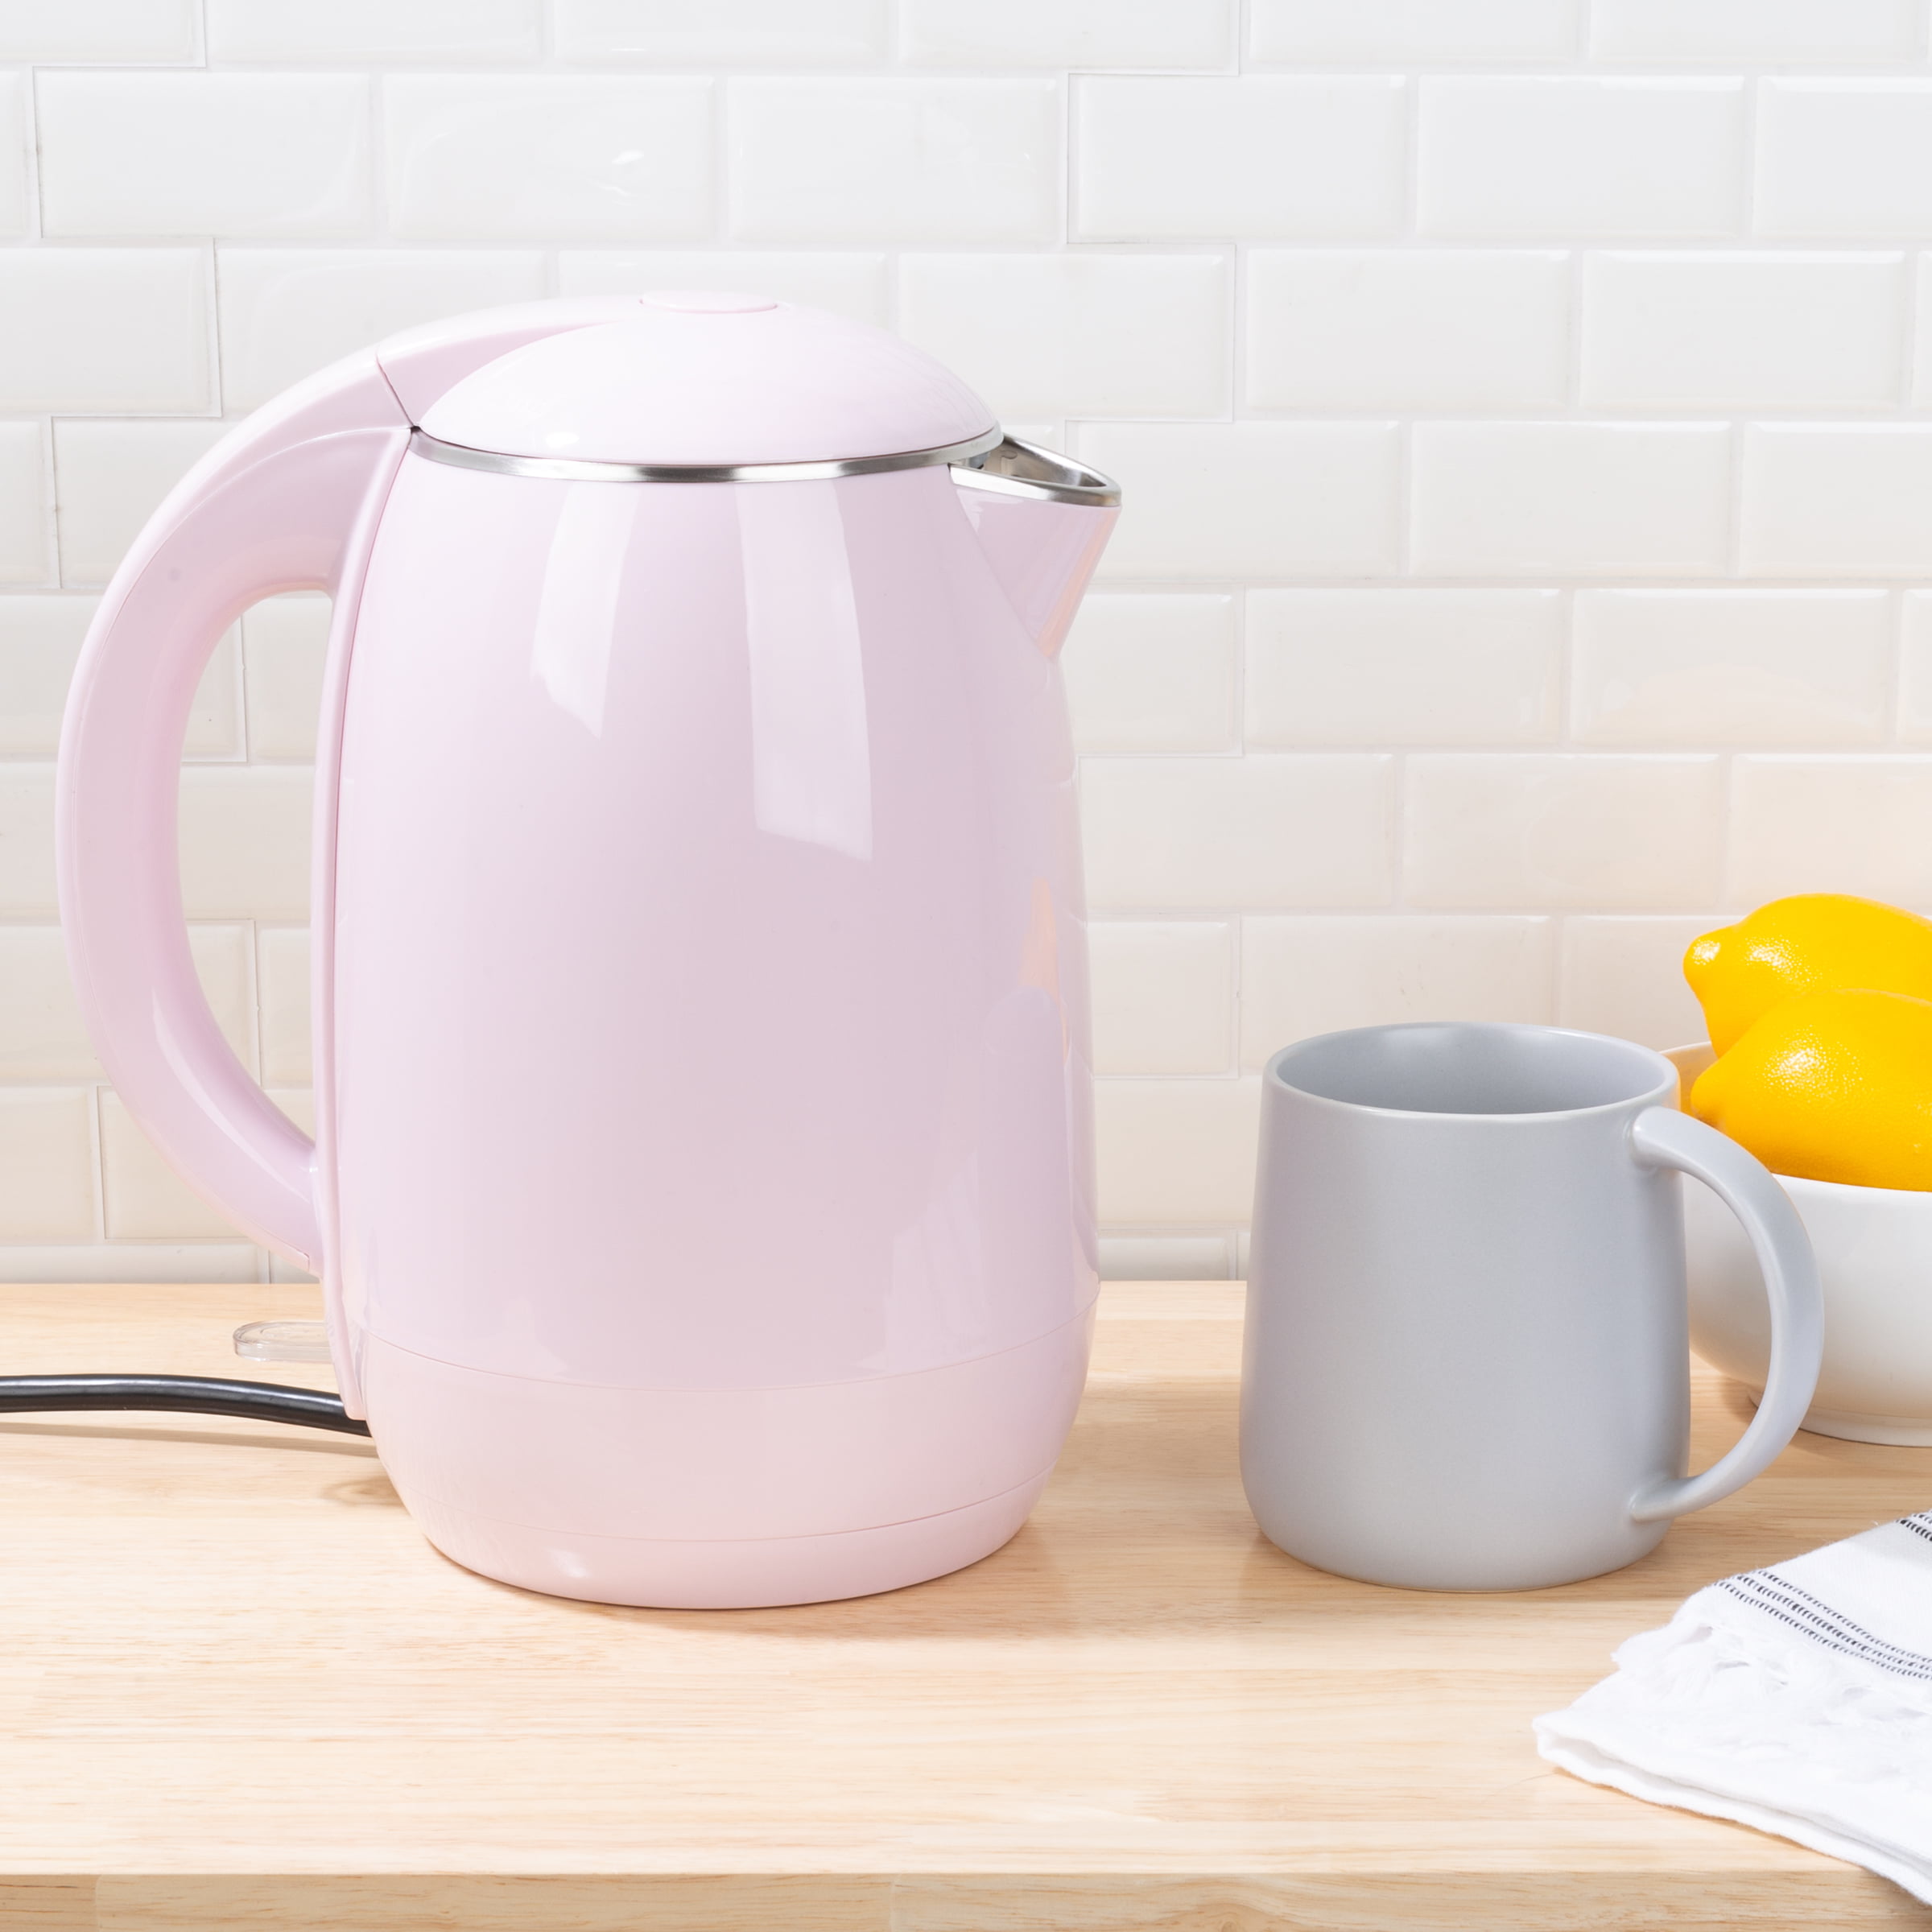  Kettle 2000W 2L Electric Hot Water Kettle Auto Shutoff Boil Dry  Protection Water Boiler Heater Tea Kettle UK Plug 220V (Pink): Home &  Kitchen